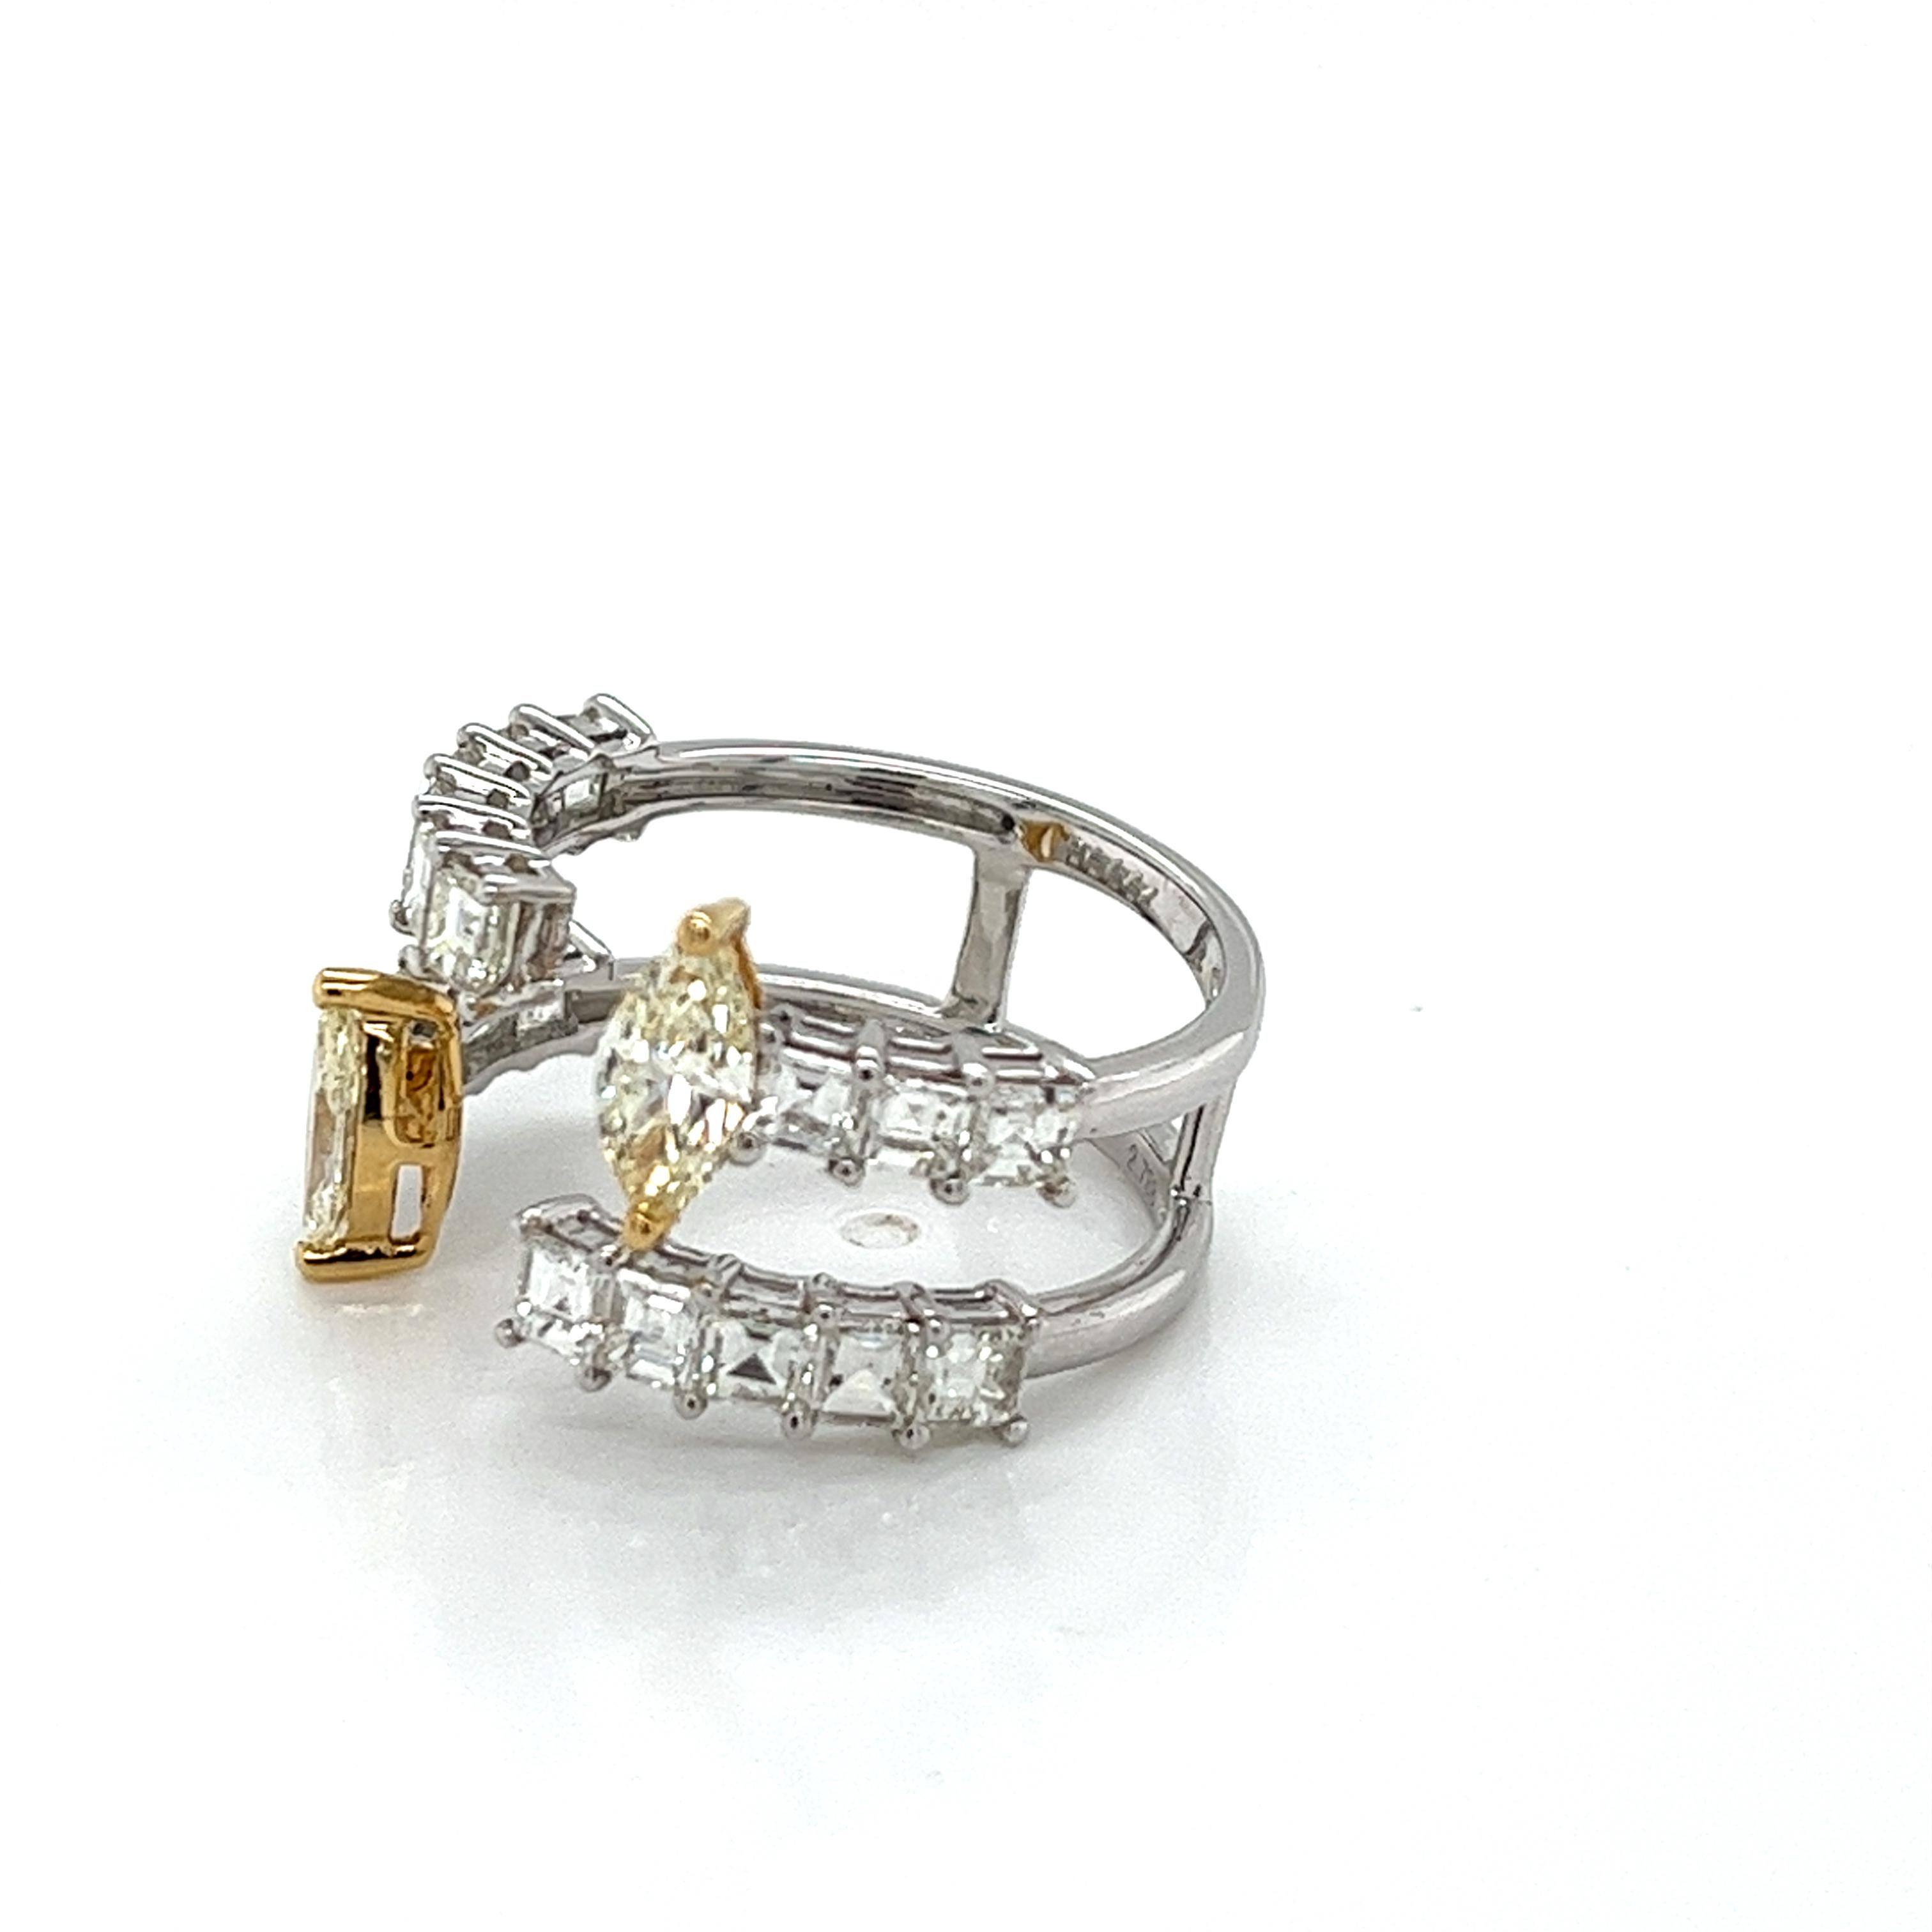 Contemporary 18Kt White and Yellow Gold Ring with diamons 2.79 cts. For Sale